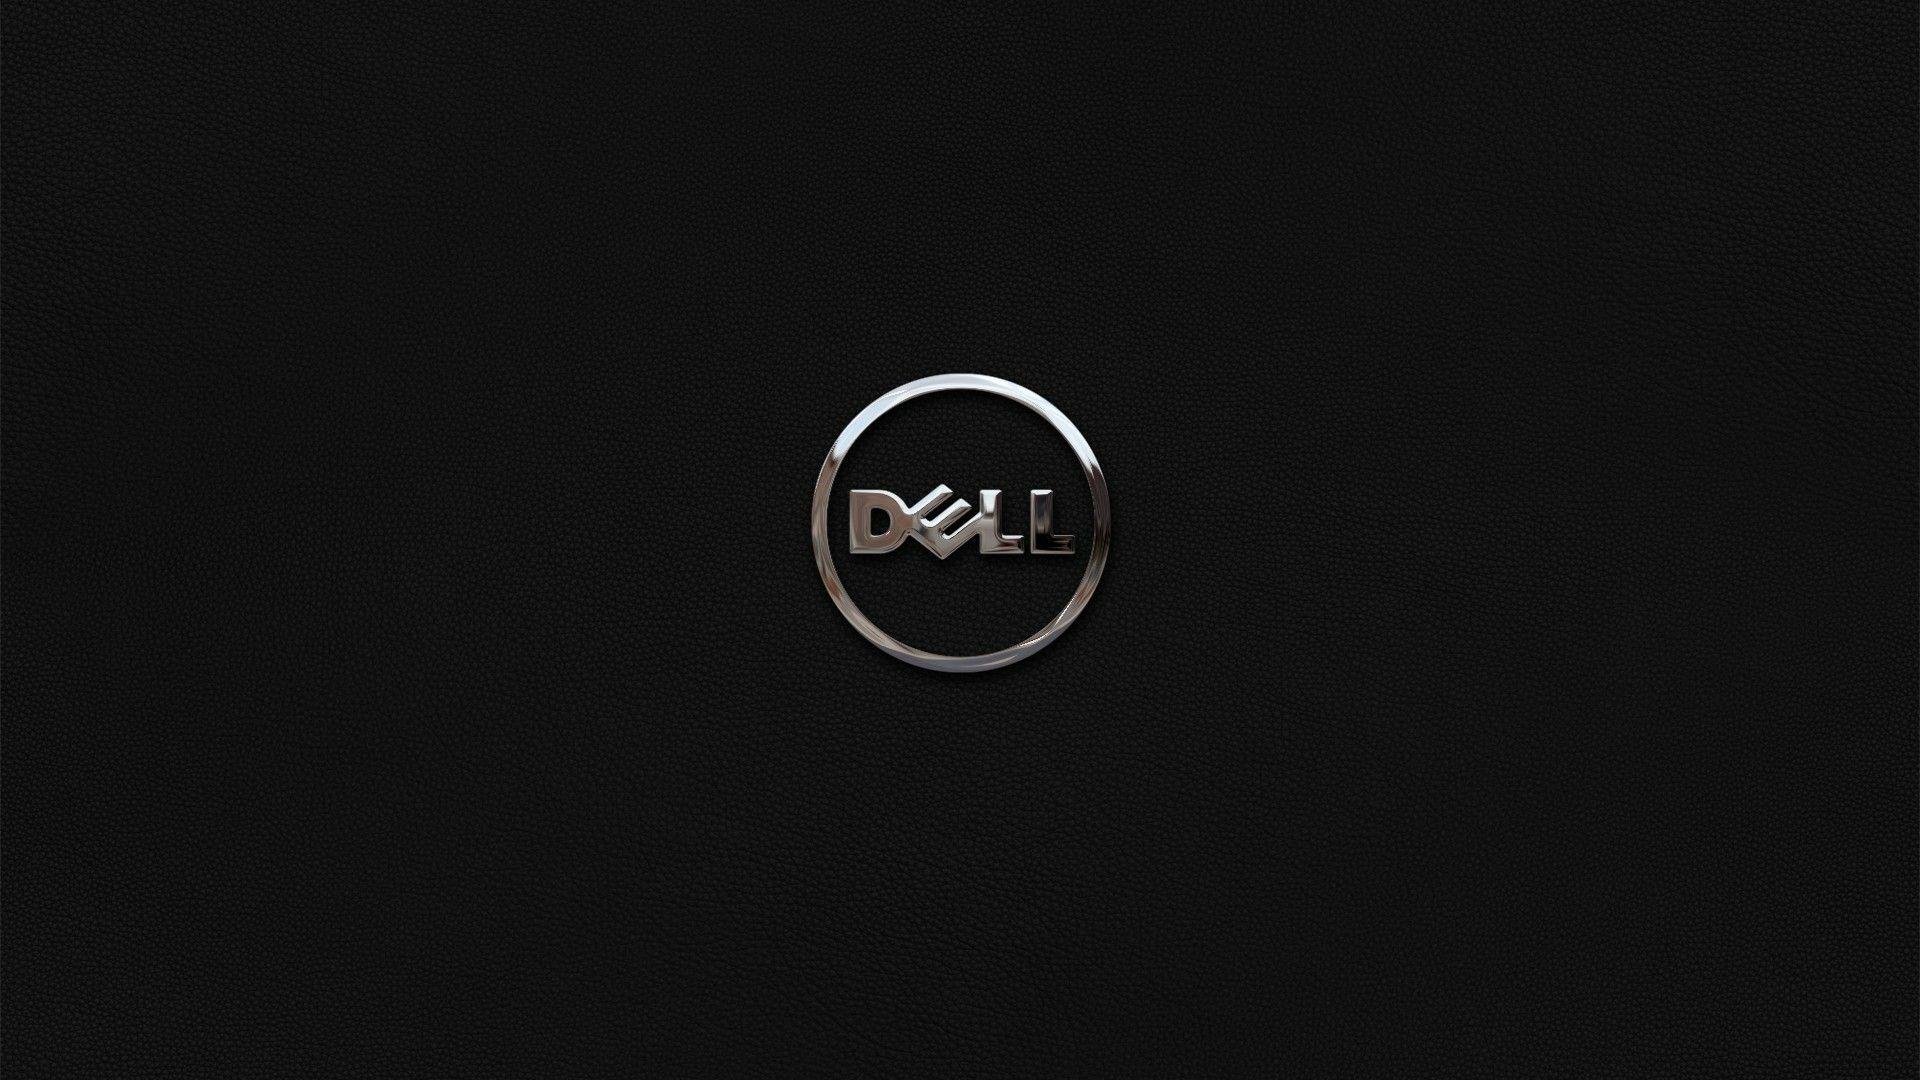 Dell Gaming Laptop Wallpapers Top Free Dell Gaming Laptop Backgrounds Wallpaperaccess